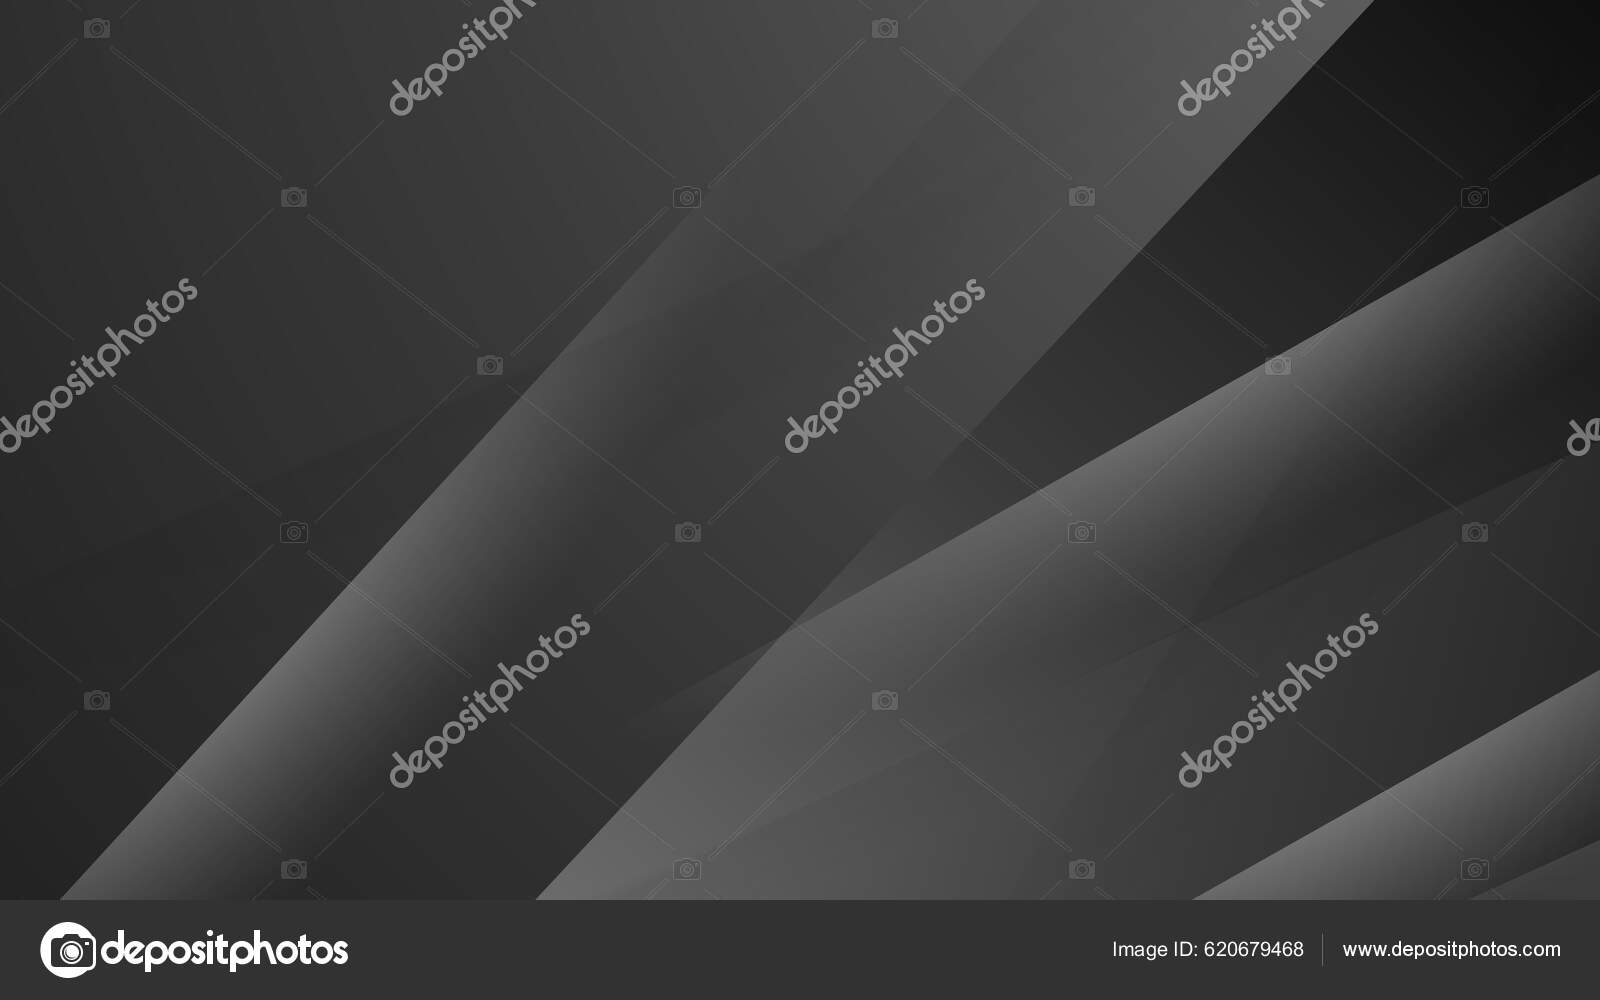 Feather Wool Dark Black With Light Abstract Background Stock Photo -  Download Image Now - iStock